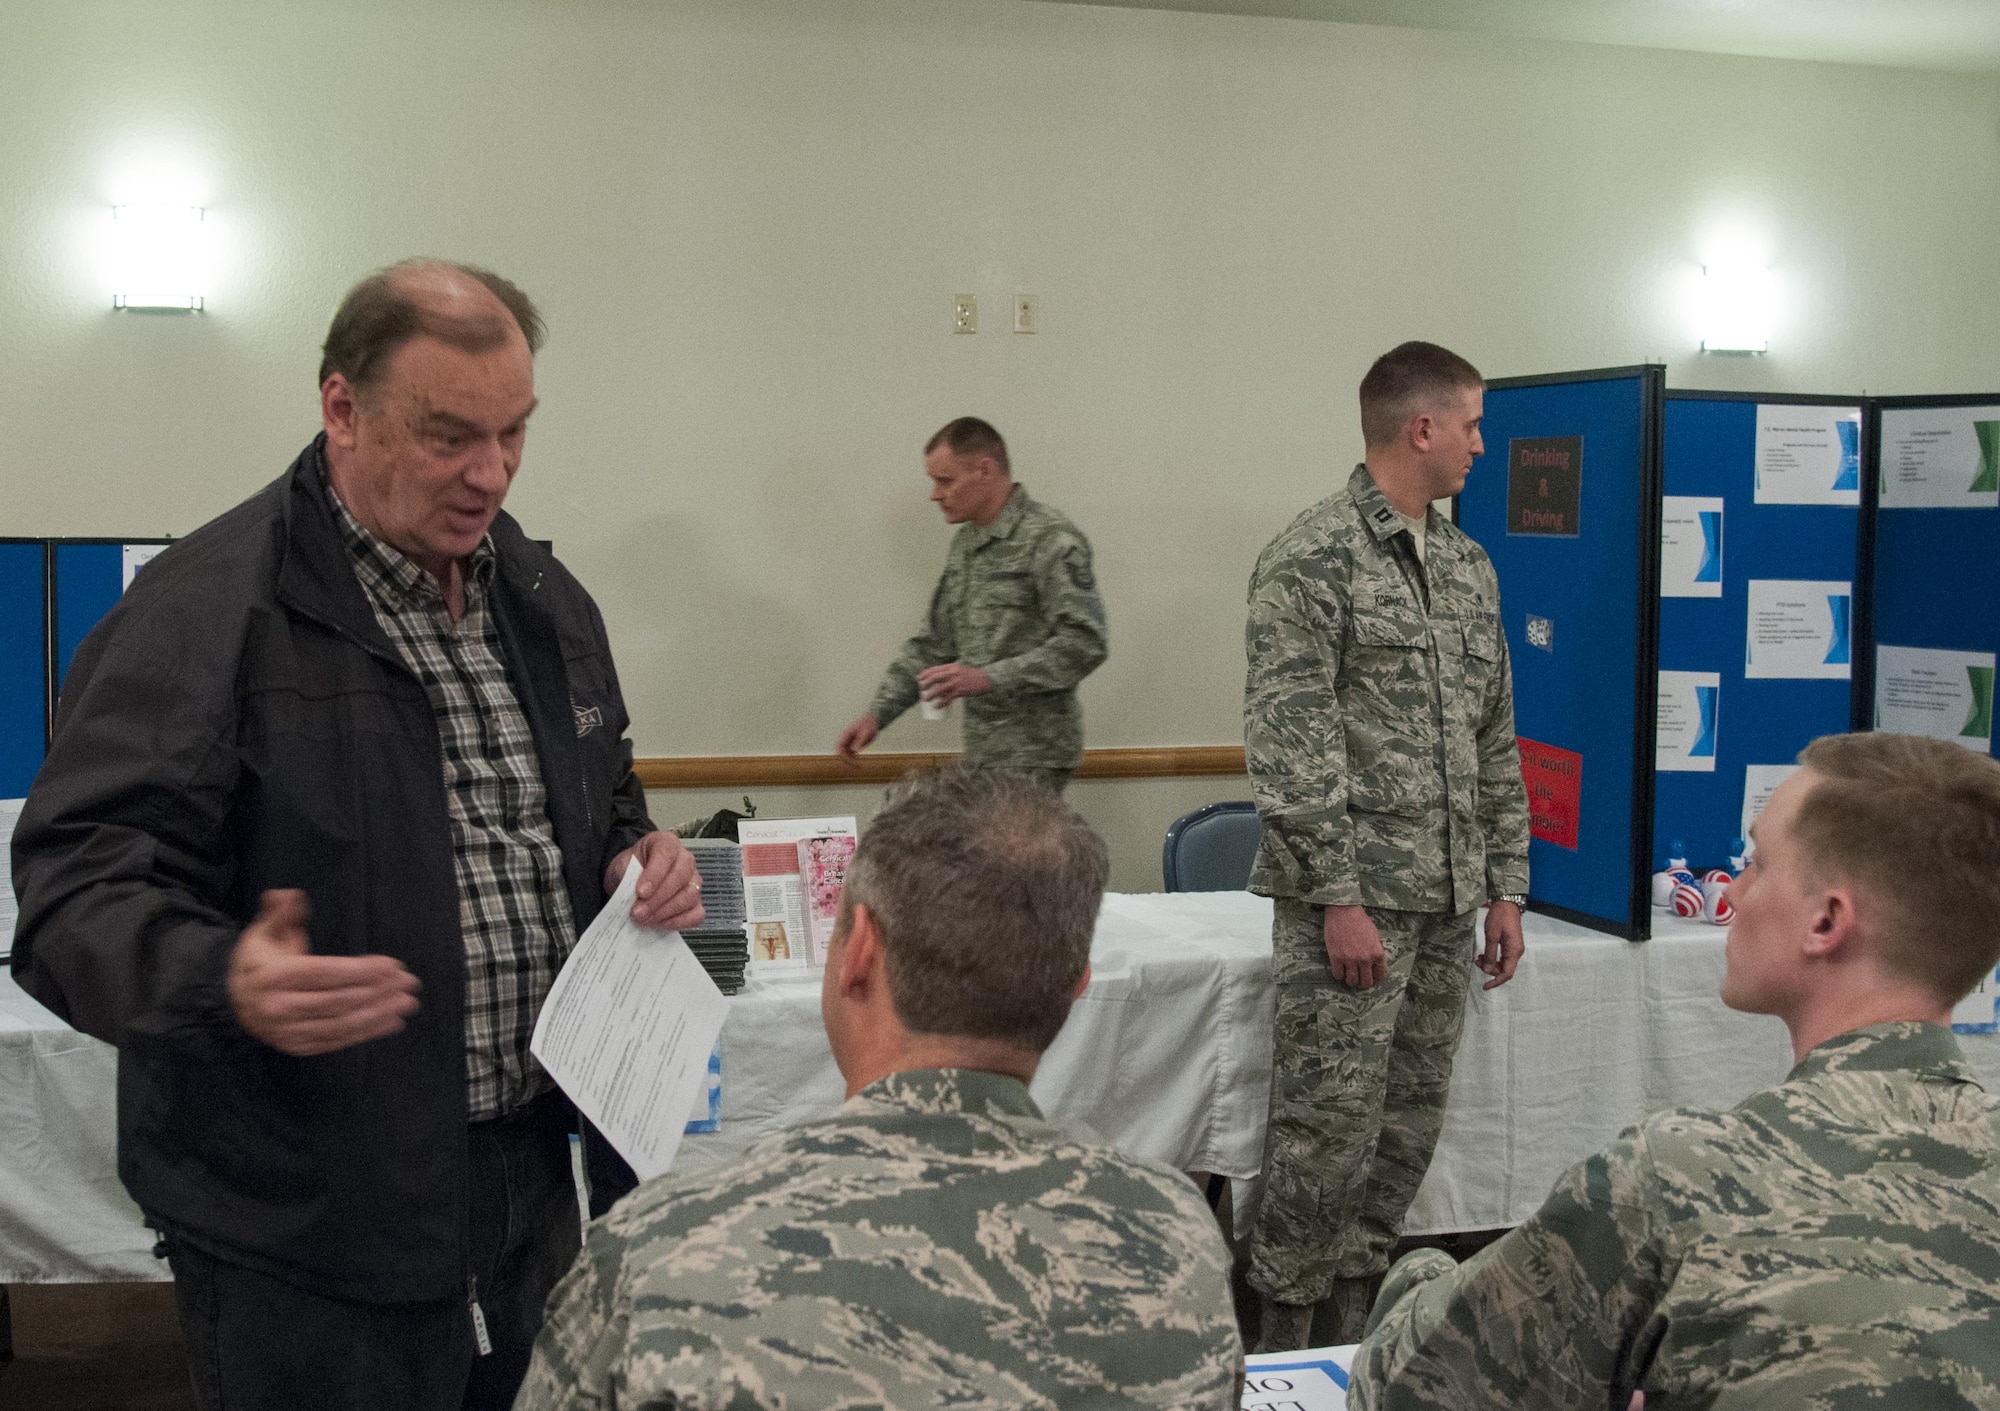 Retired Staff Sgt. Brian Walker talks with 90th Missile Wing judge advocates manning an information booth during Retiree Appreciation Day on F.E. Warren Air Force Base, Wyo., April 30, 2016. The base legal office gave a briefing on their services to the more than 150 retirees and dependents who attended the event and then met with individuals to answer their questions. (U.S. Air Force photo by Senior Airman Jason Wiese)